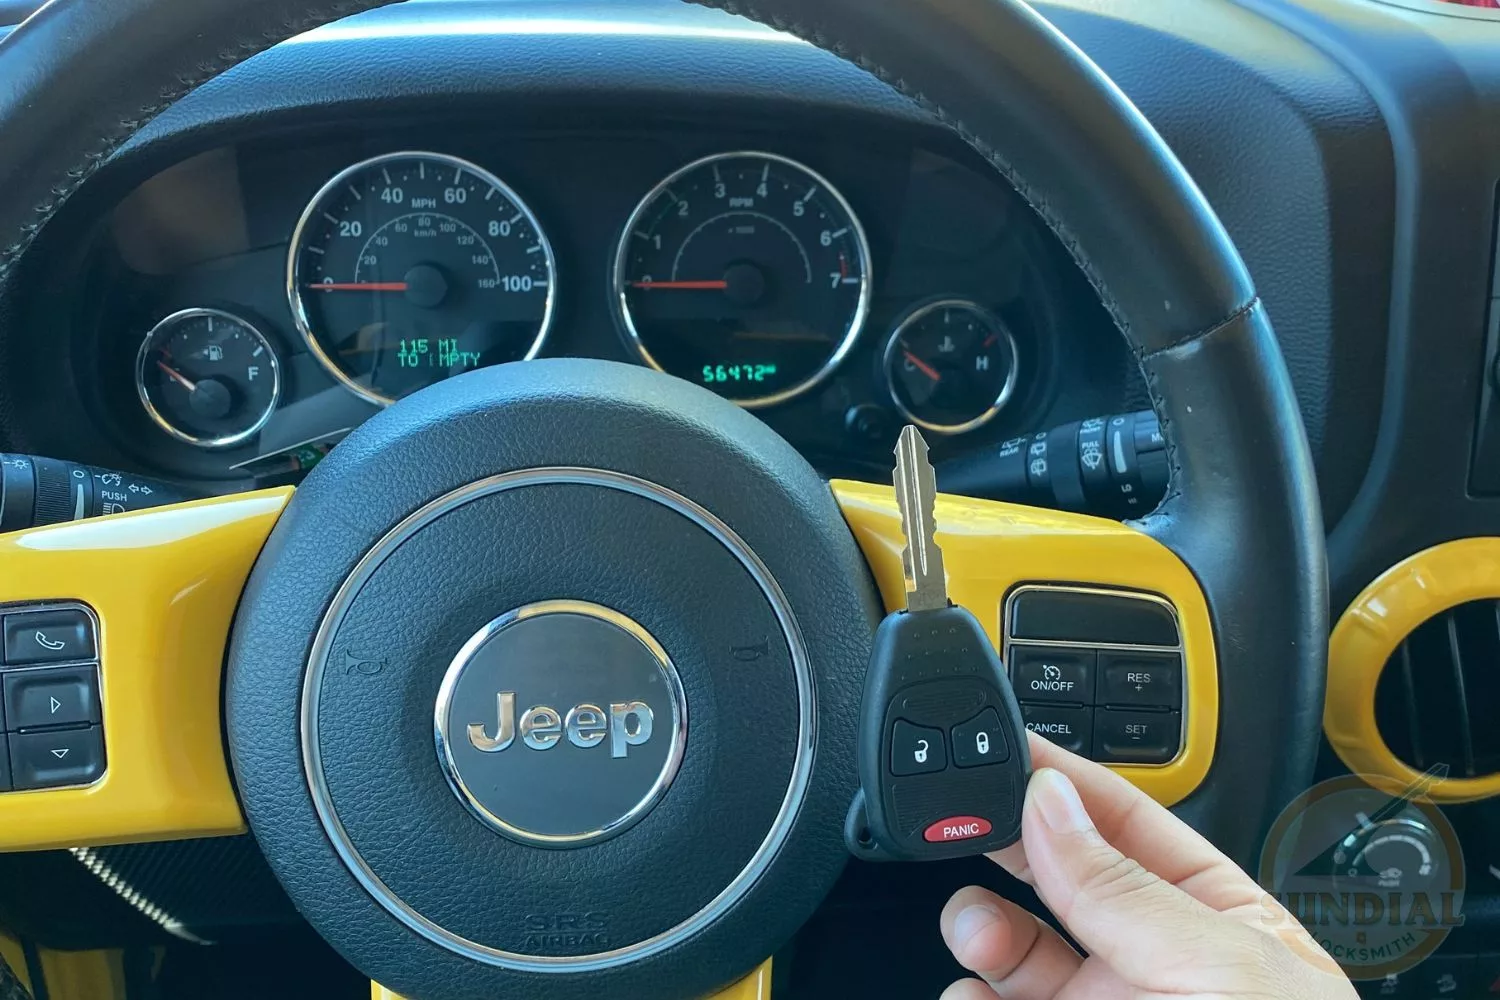 Jeep dashboard with key fob and steering wheel.